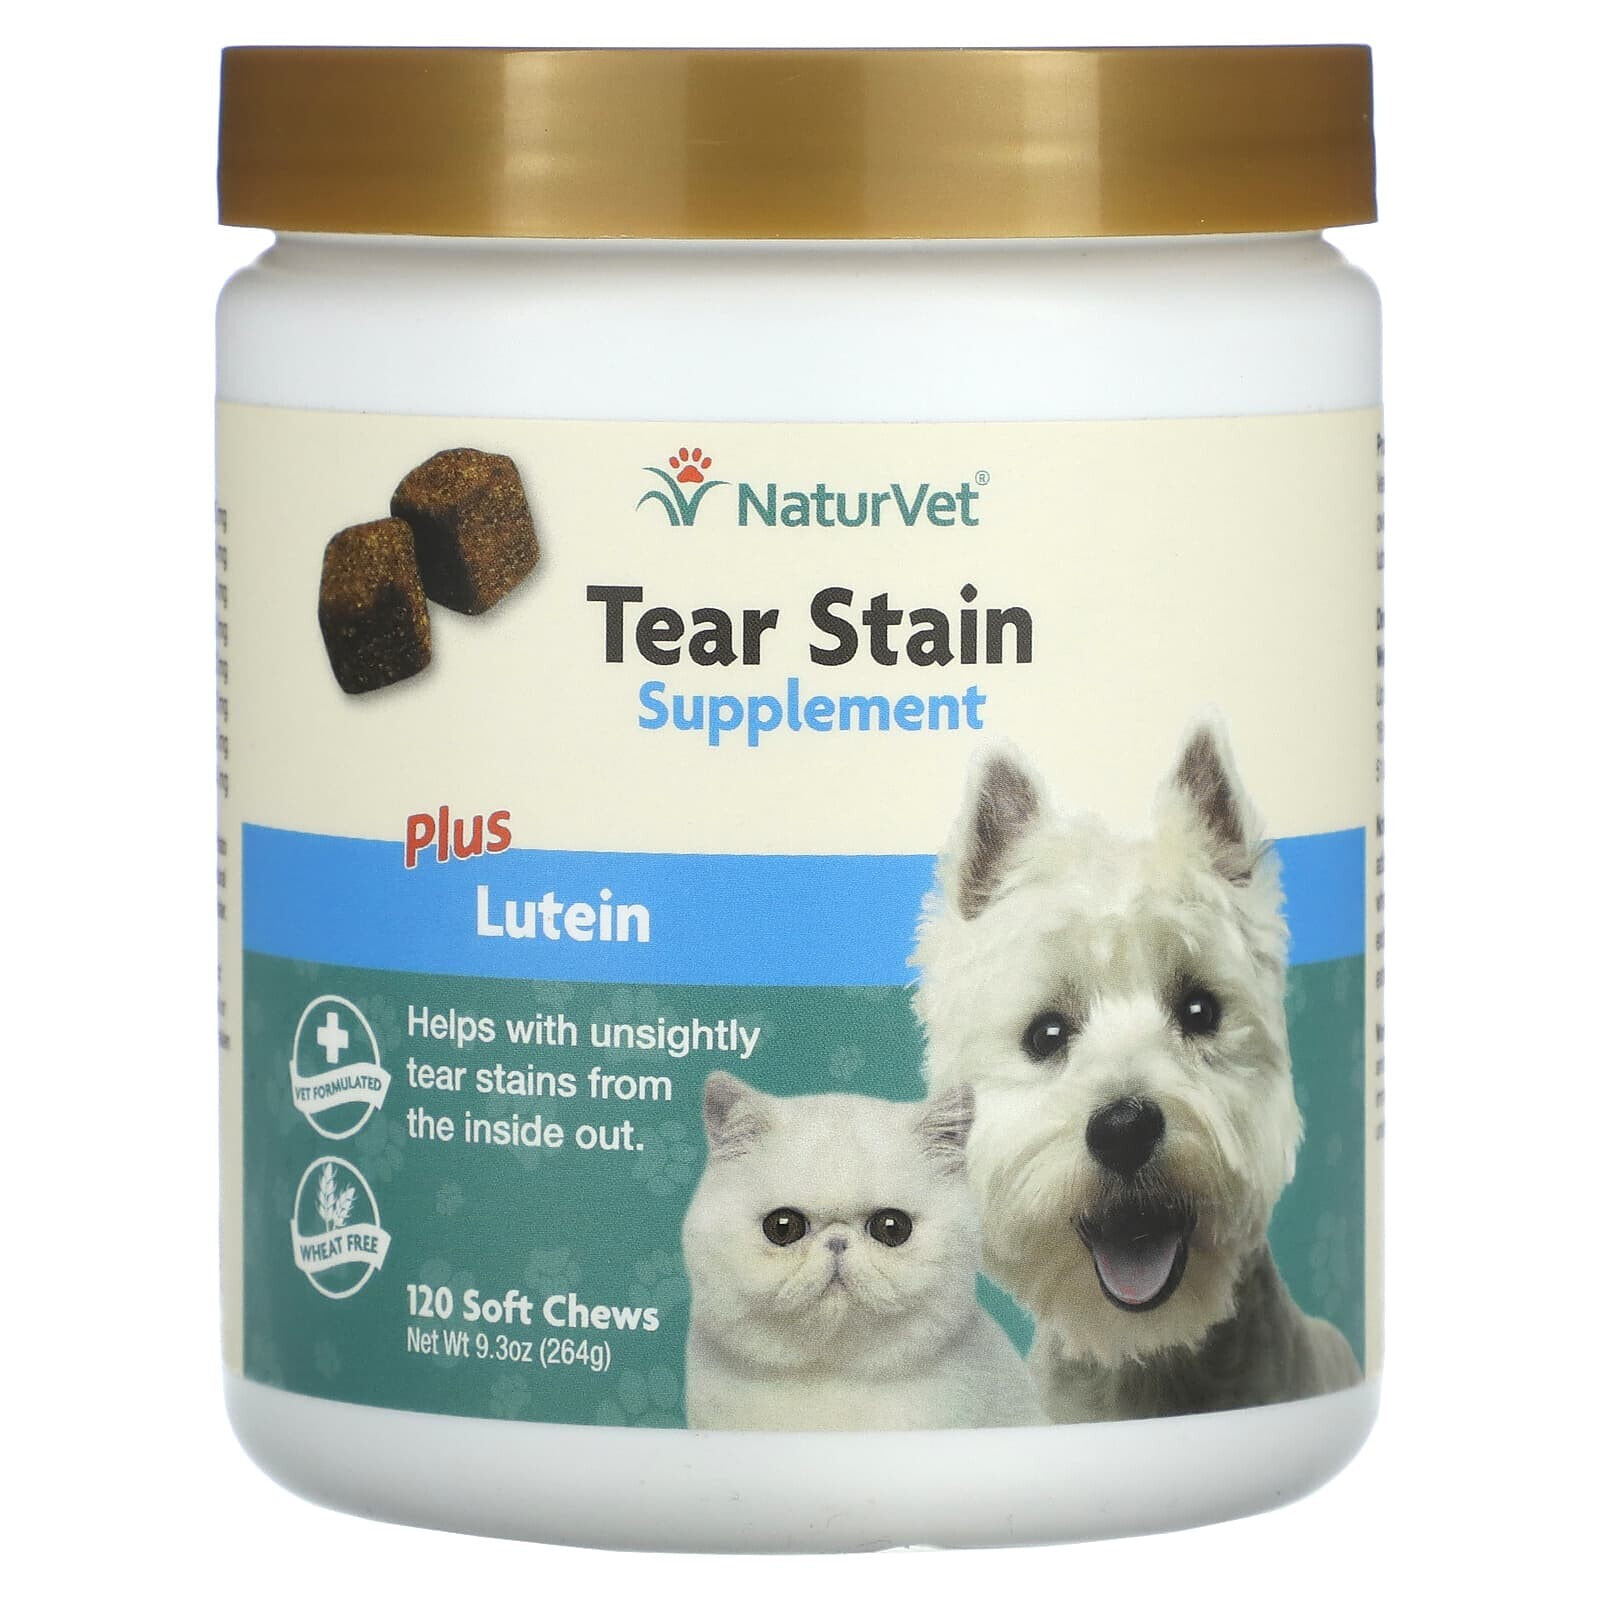 Tear Stain Plus Lutein, For Dogs & Cats, 120 Soft Chews, 9.3 oz (264 g)